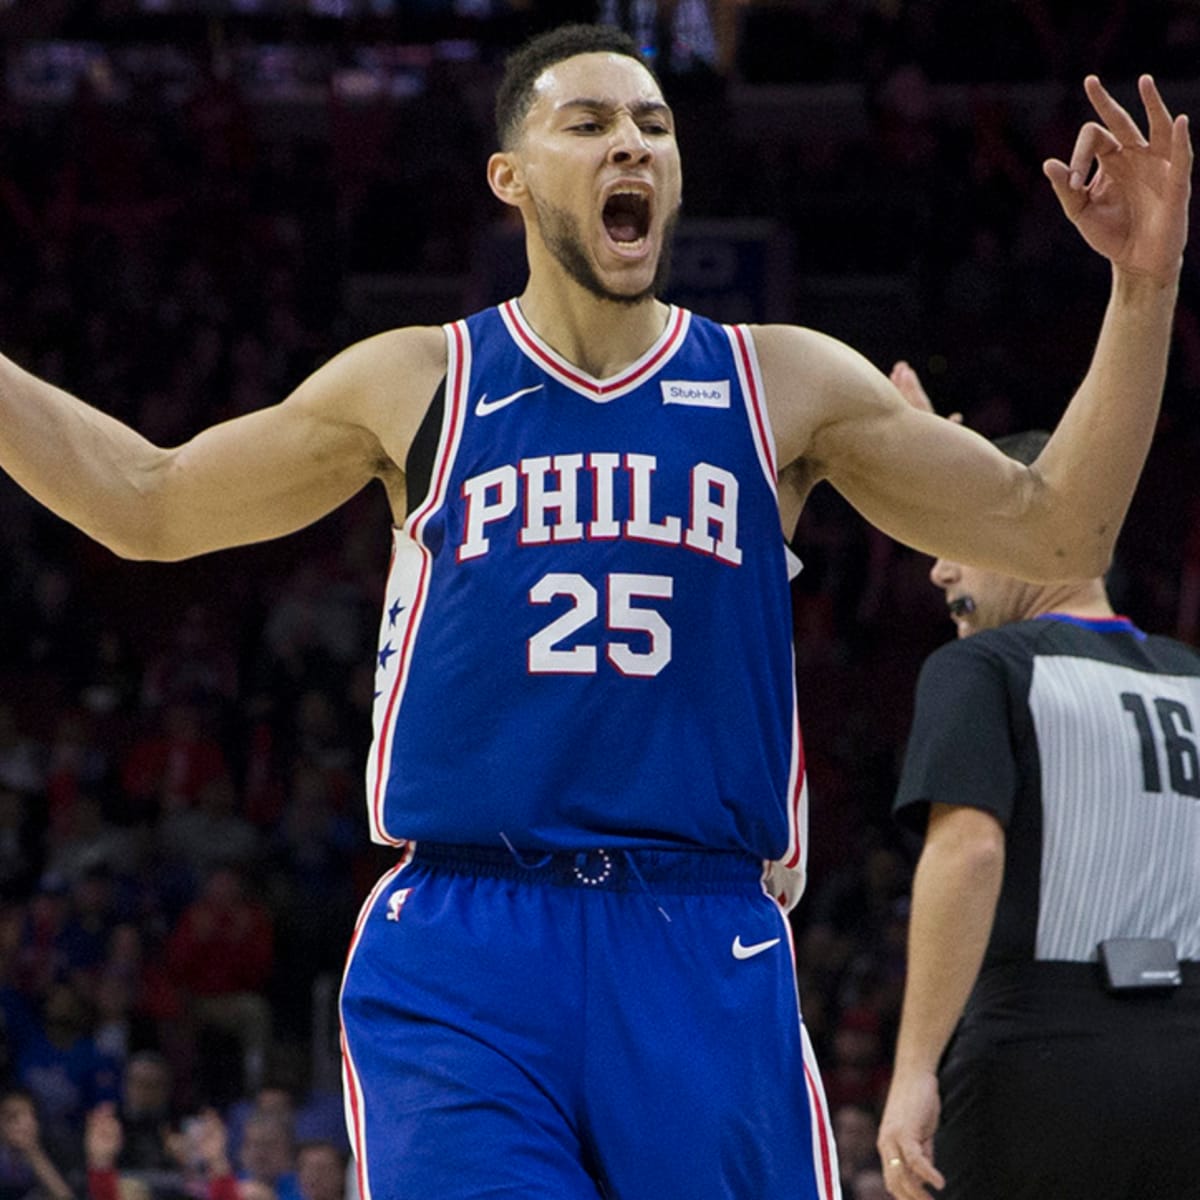 Ben Simmons' jersey ripped in half during Sixers-Pacers game